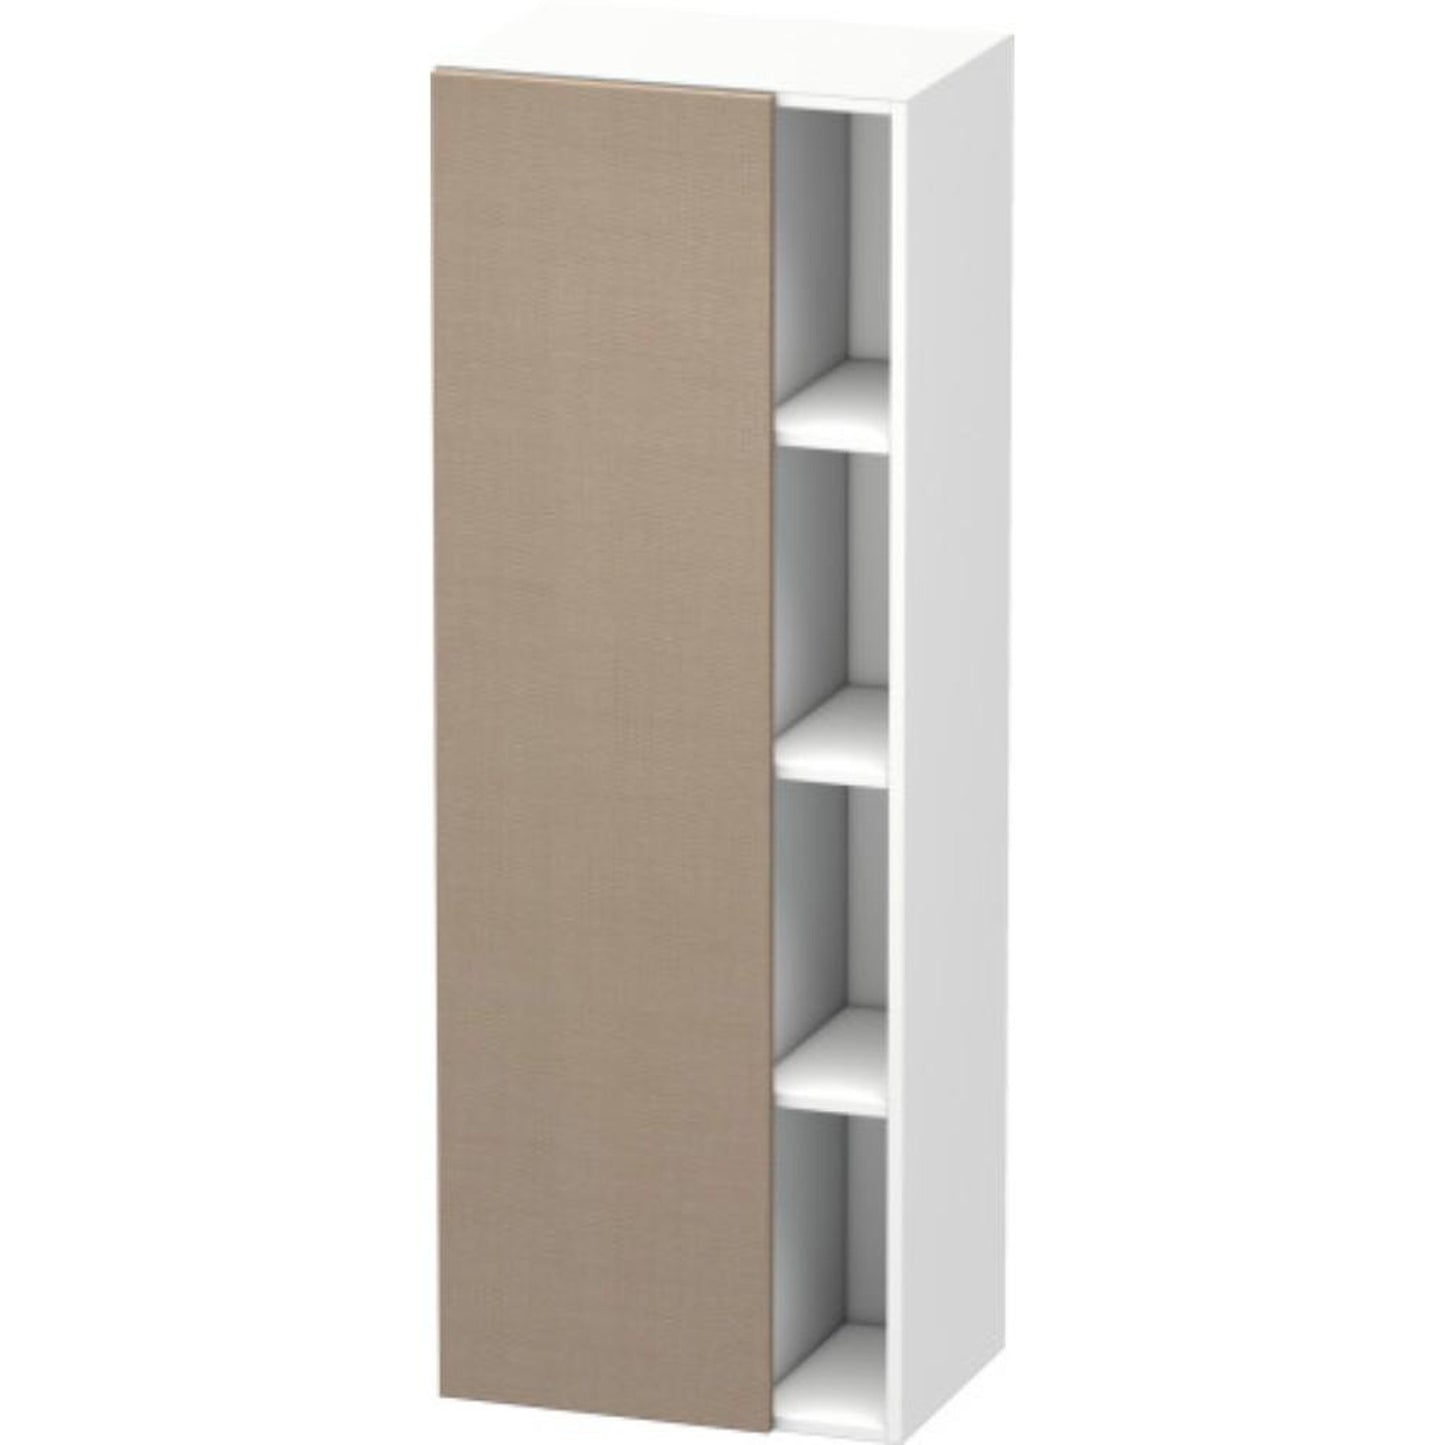 Duravit DuraStyle 20" x 55" x 14" Tall Cabinet With Left Hinge One Door in Linen and White (DS1239L7518)